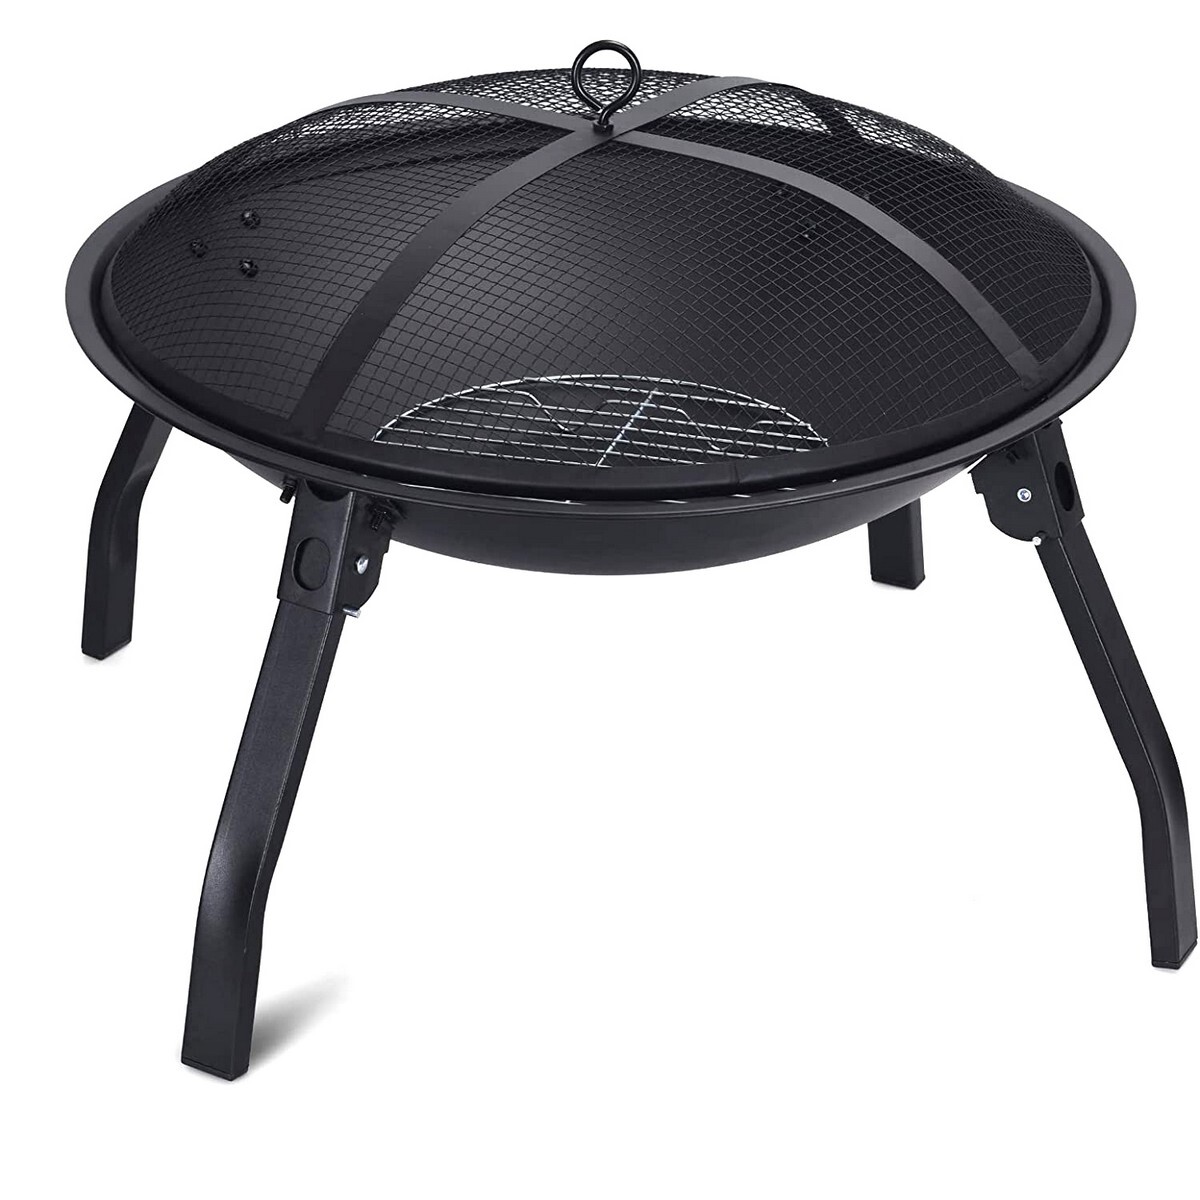 Relax BBQ Grill Basket S-010